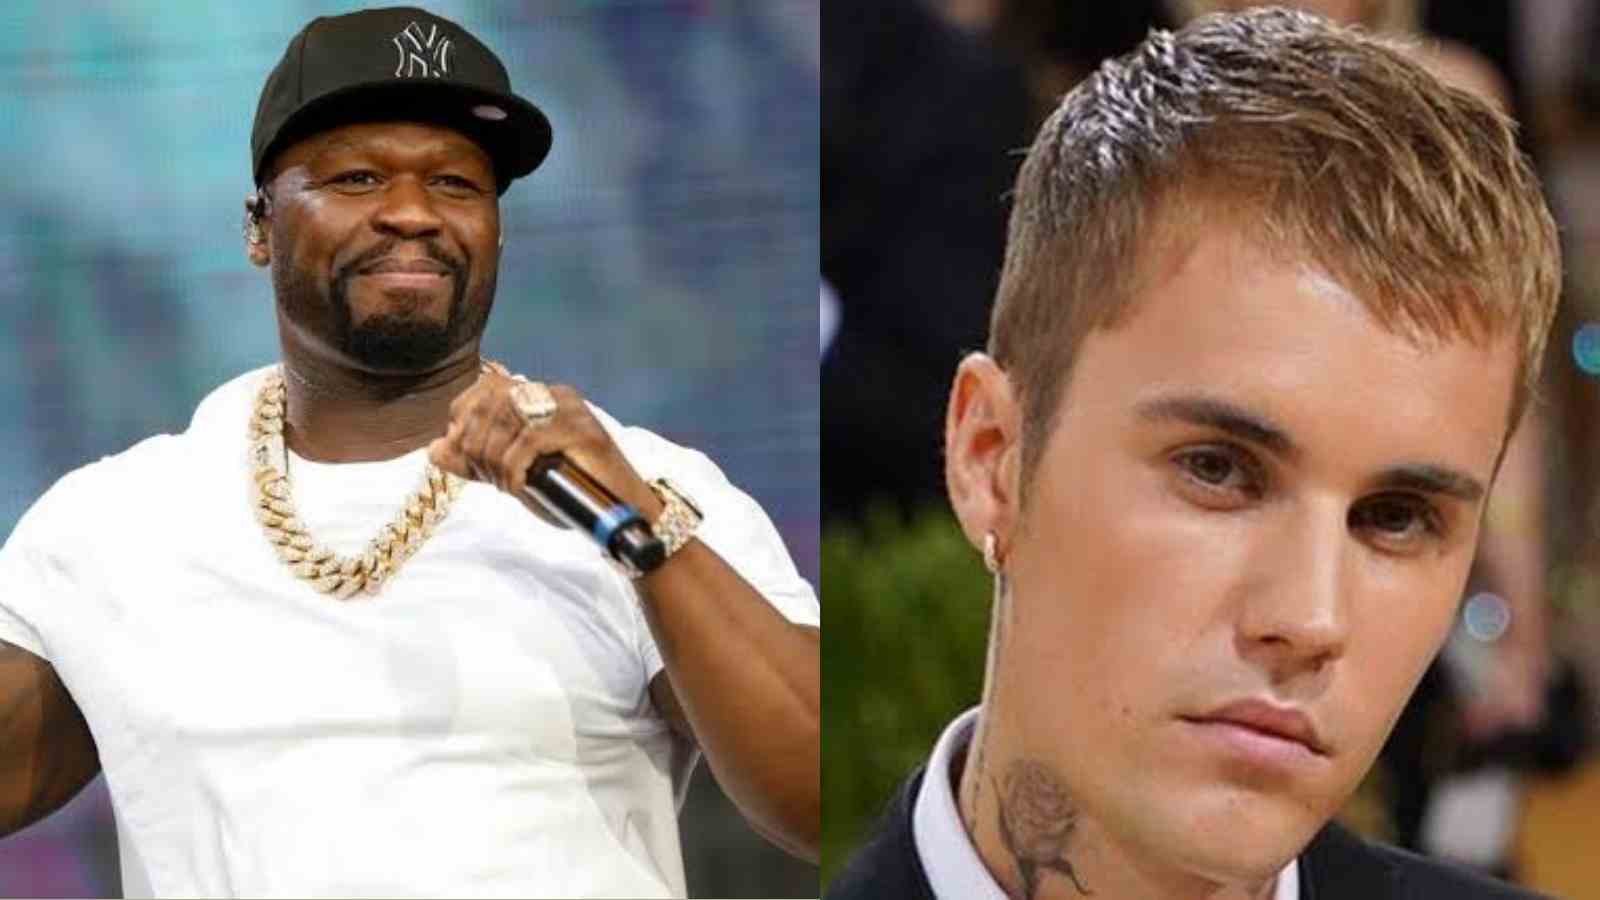 50 Cent and Justin Bieber